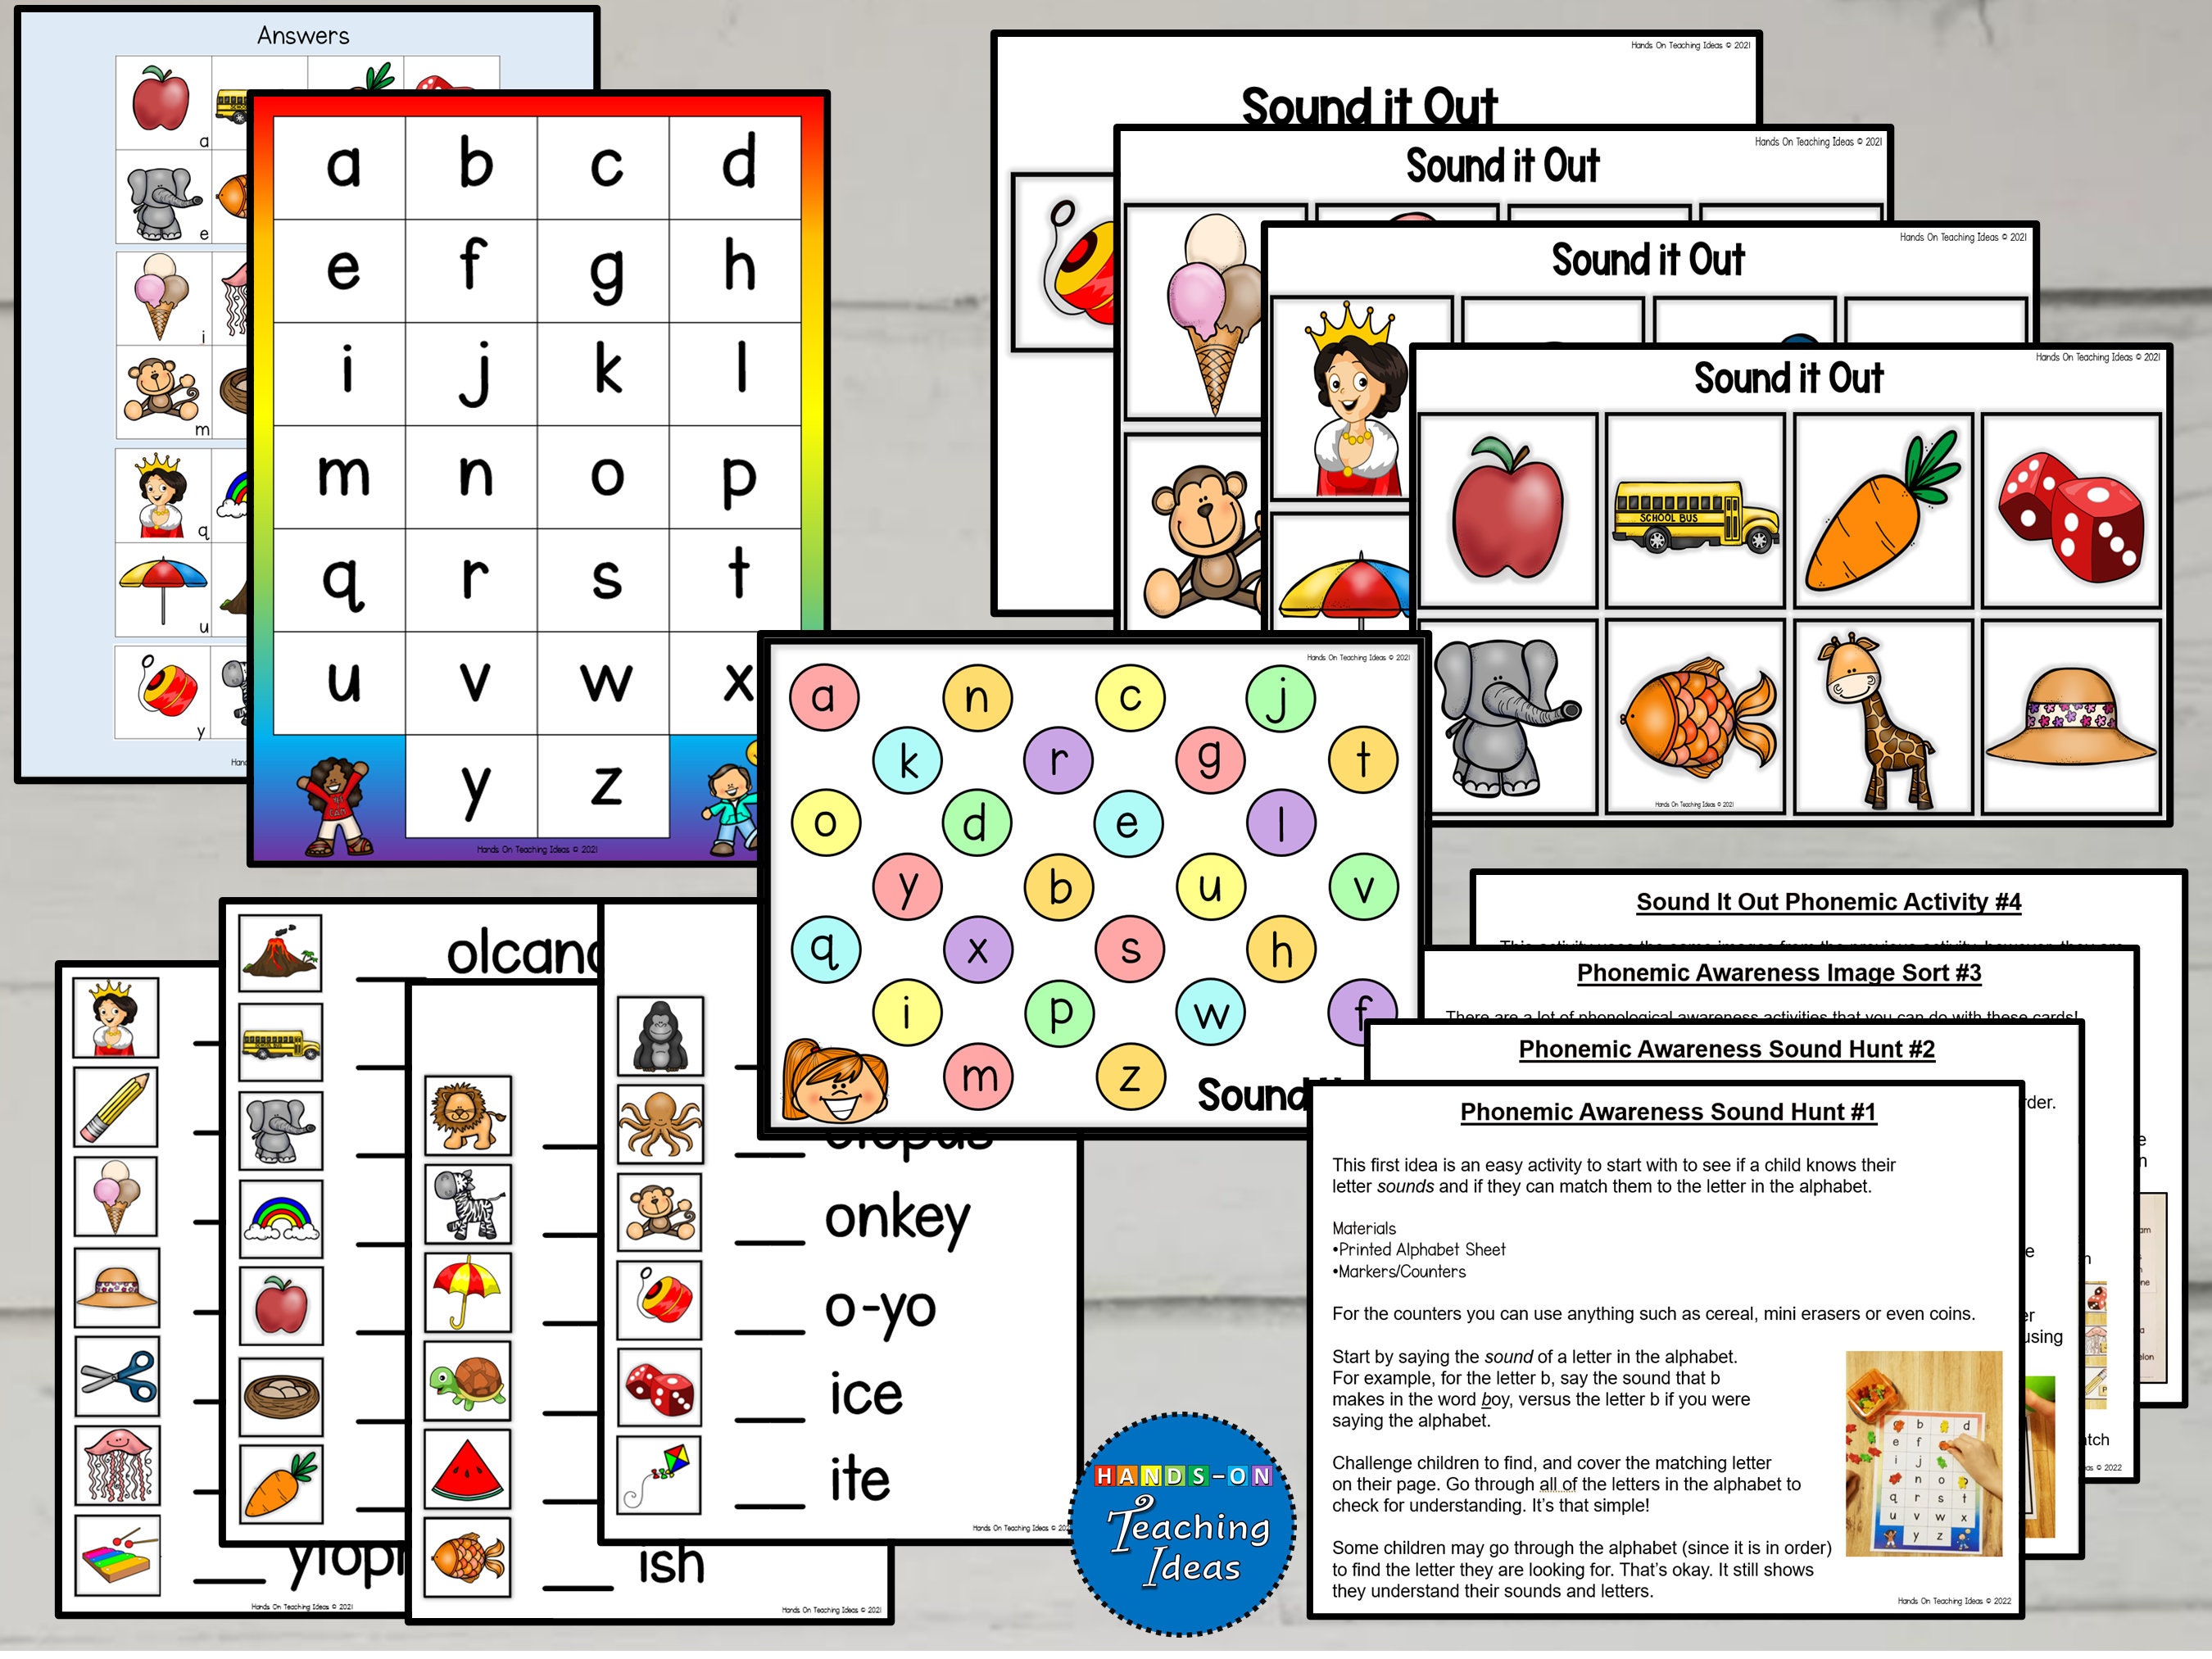 Word Work Mat with Skill-Specific Word Lists - Vowel Sounds, Digraphs,  Blends